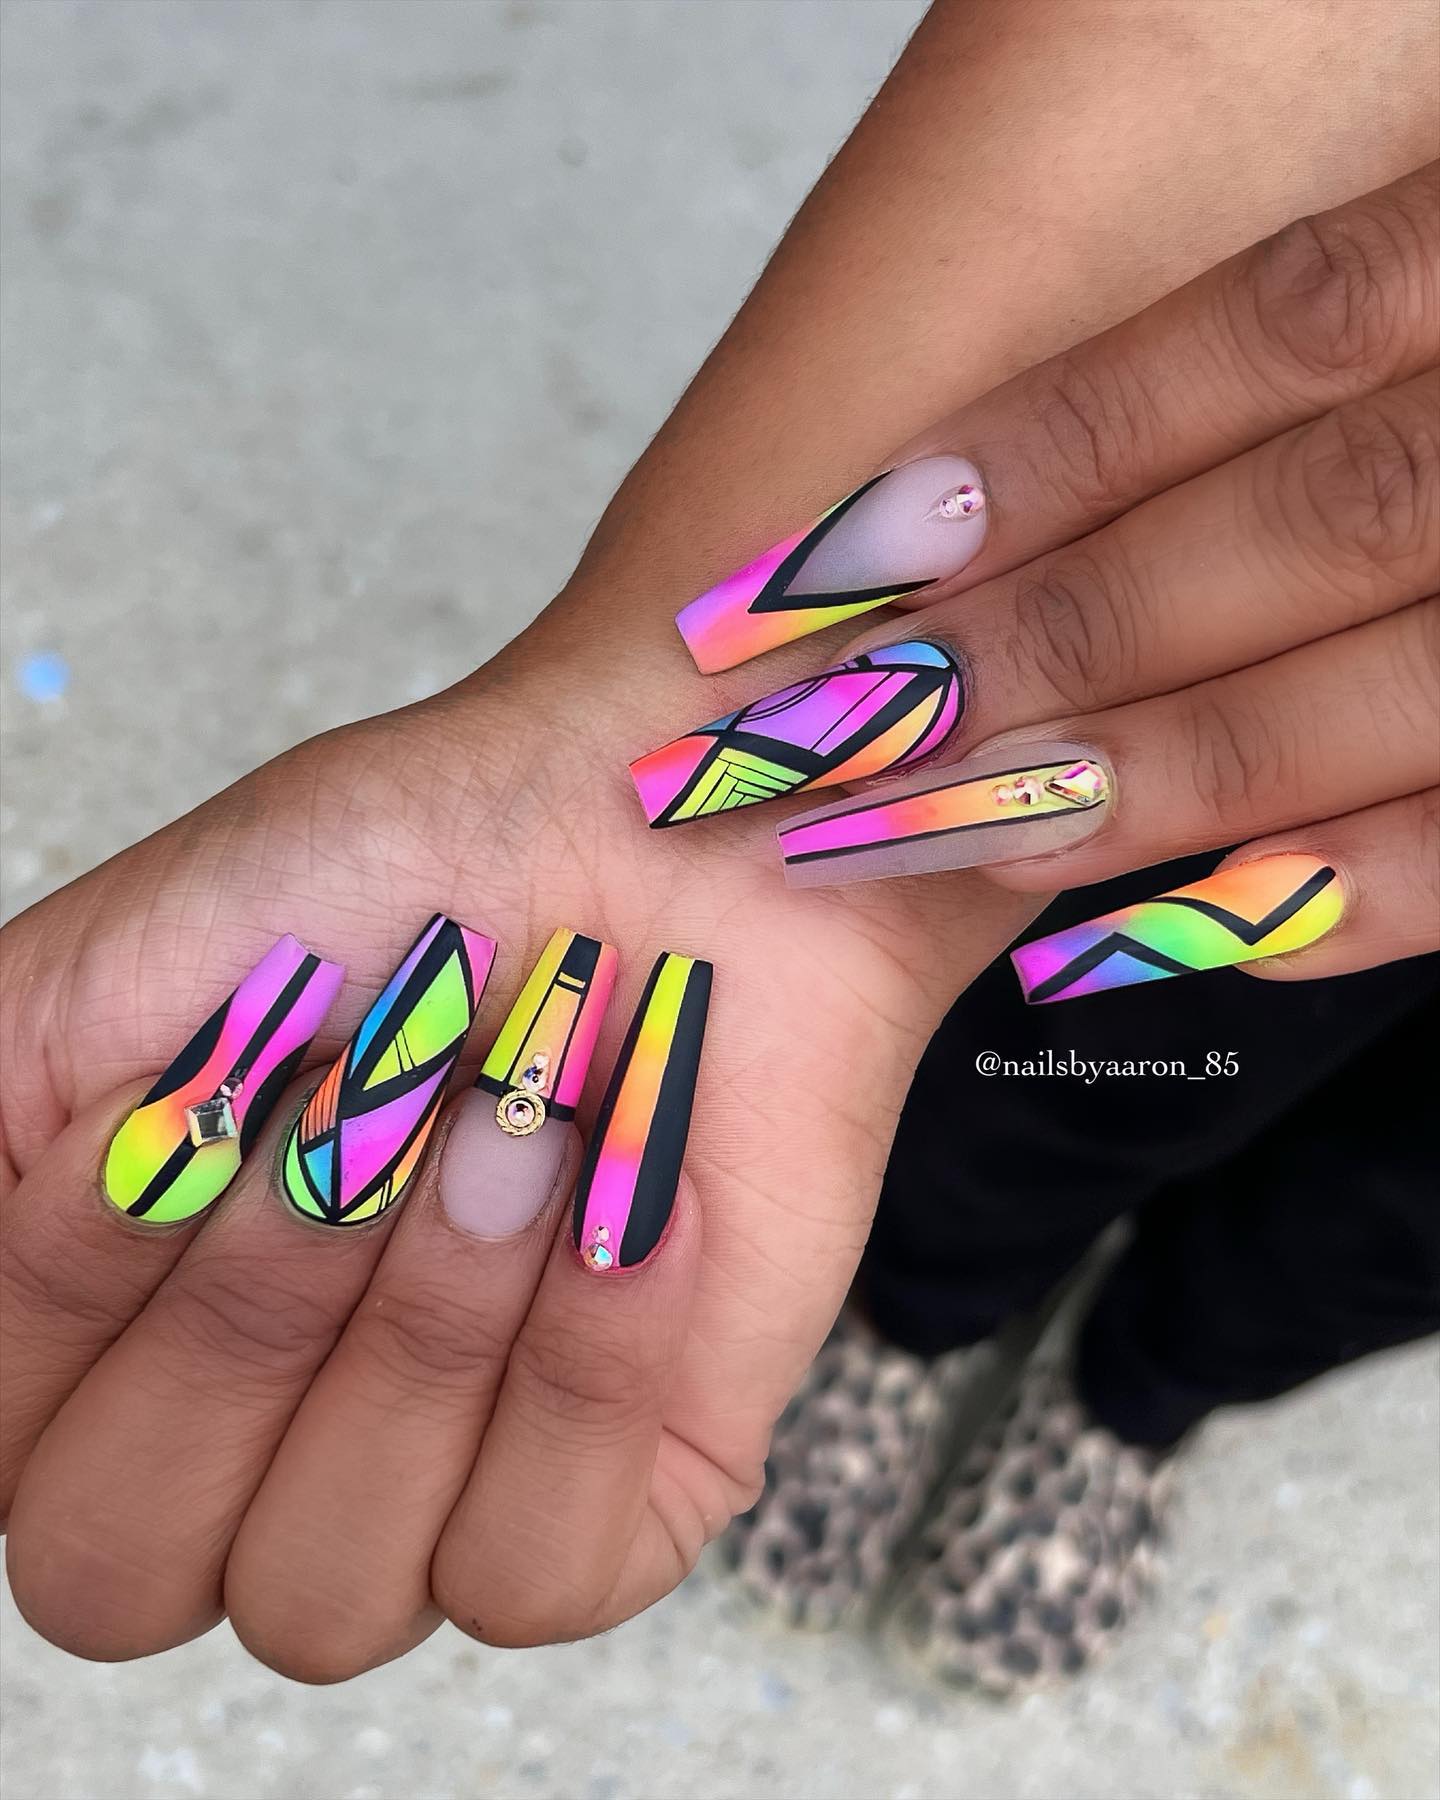 Black Nails With Vibrant Neon Accents